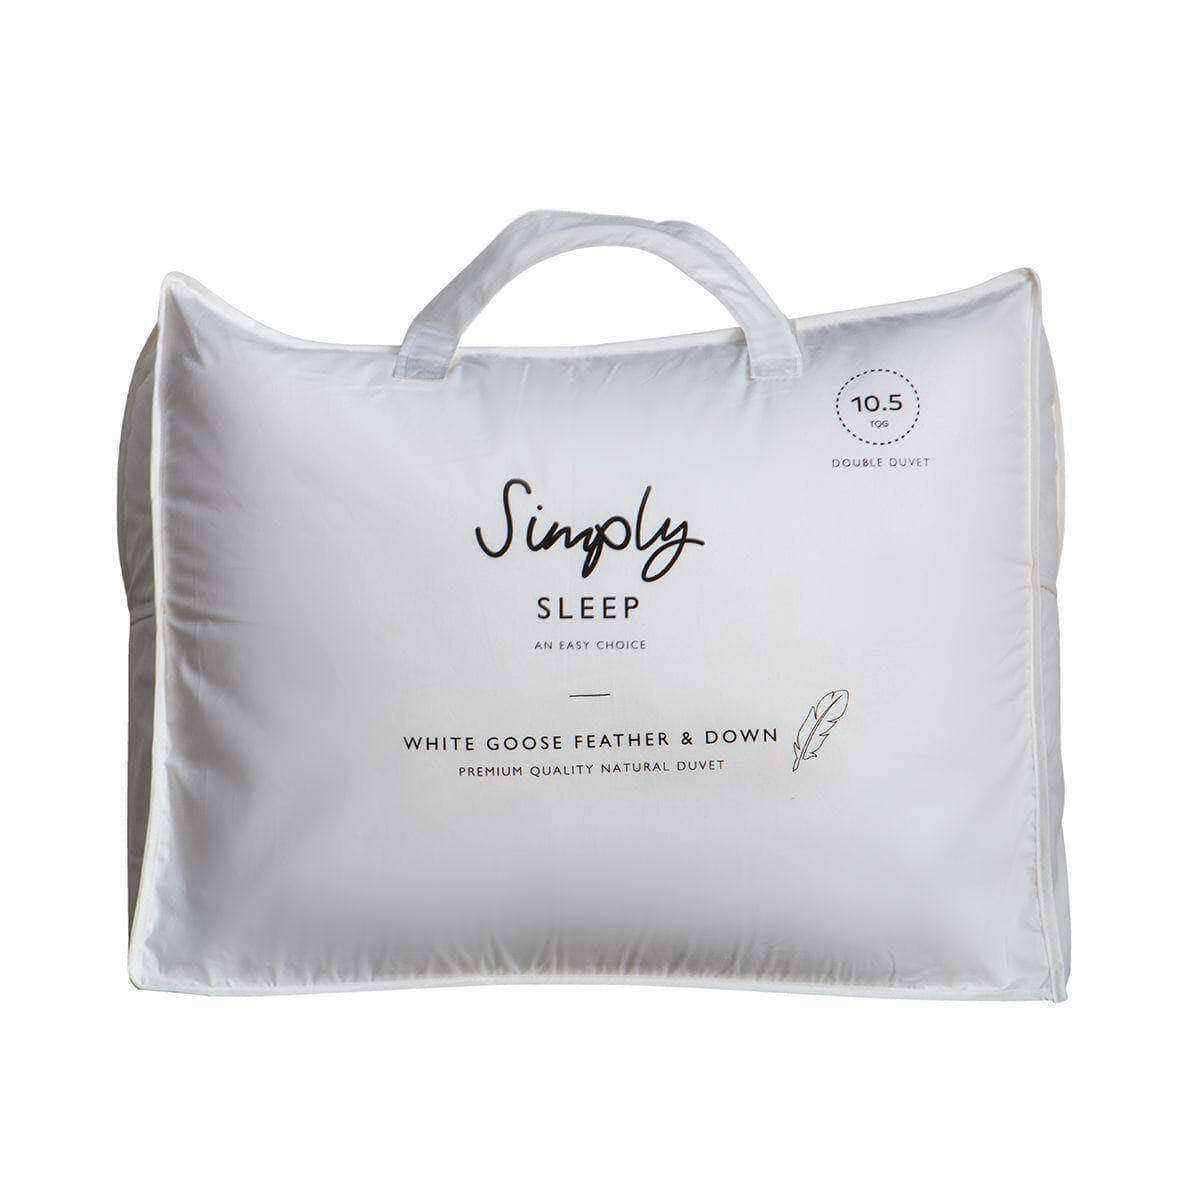 Perfect Sleep - 10.5 tog White Goose Feather and Down Duvet - select size - The Farthing